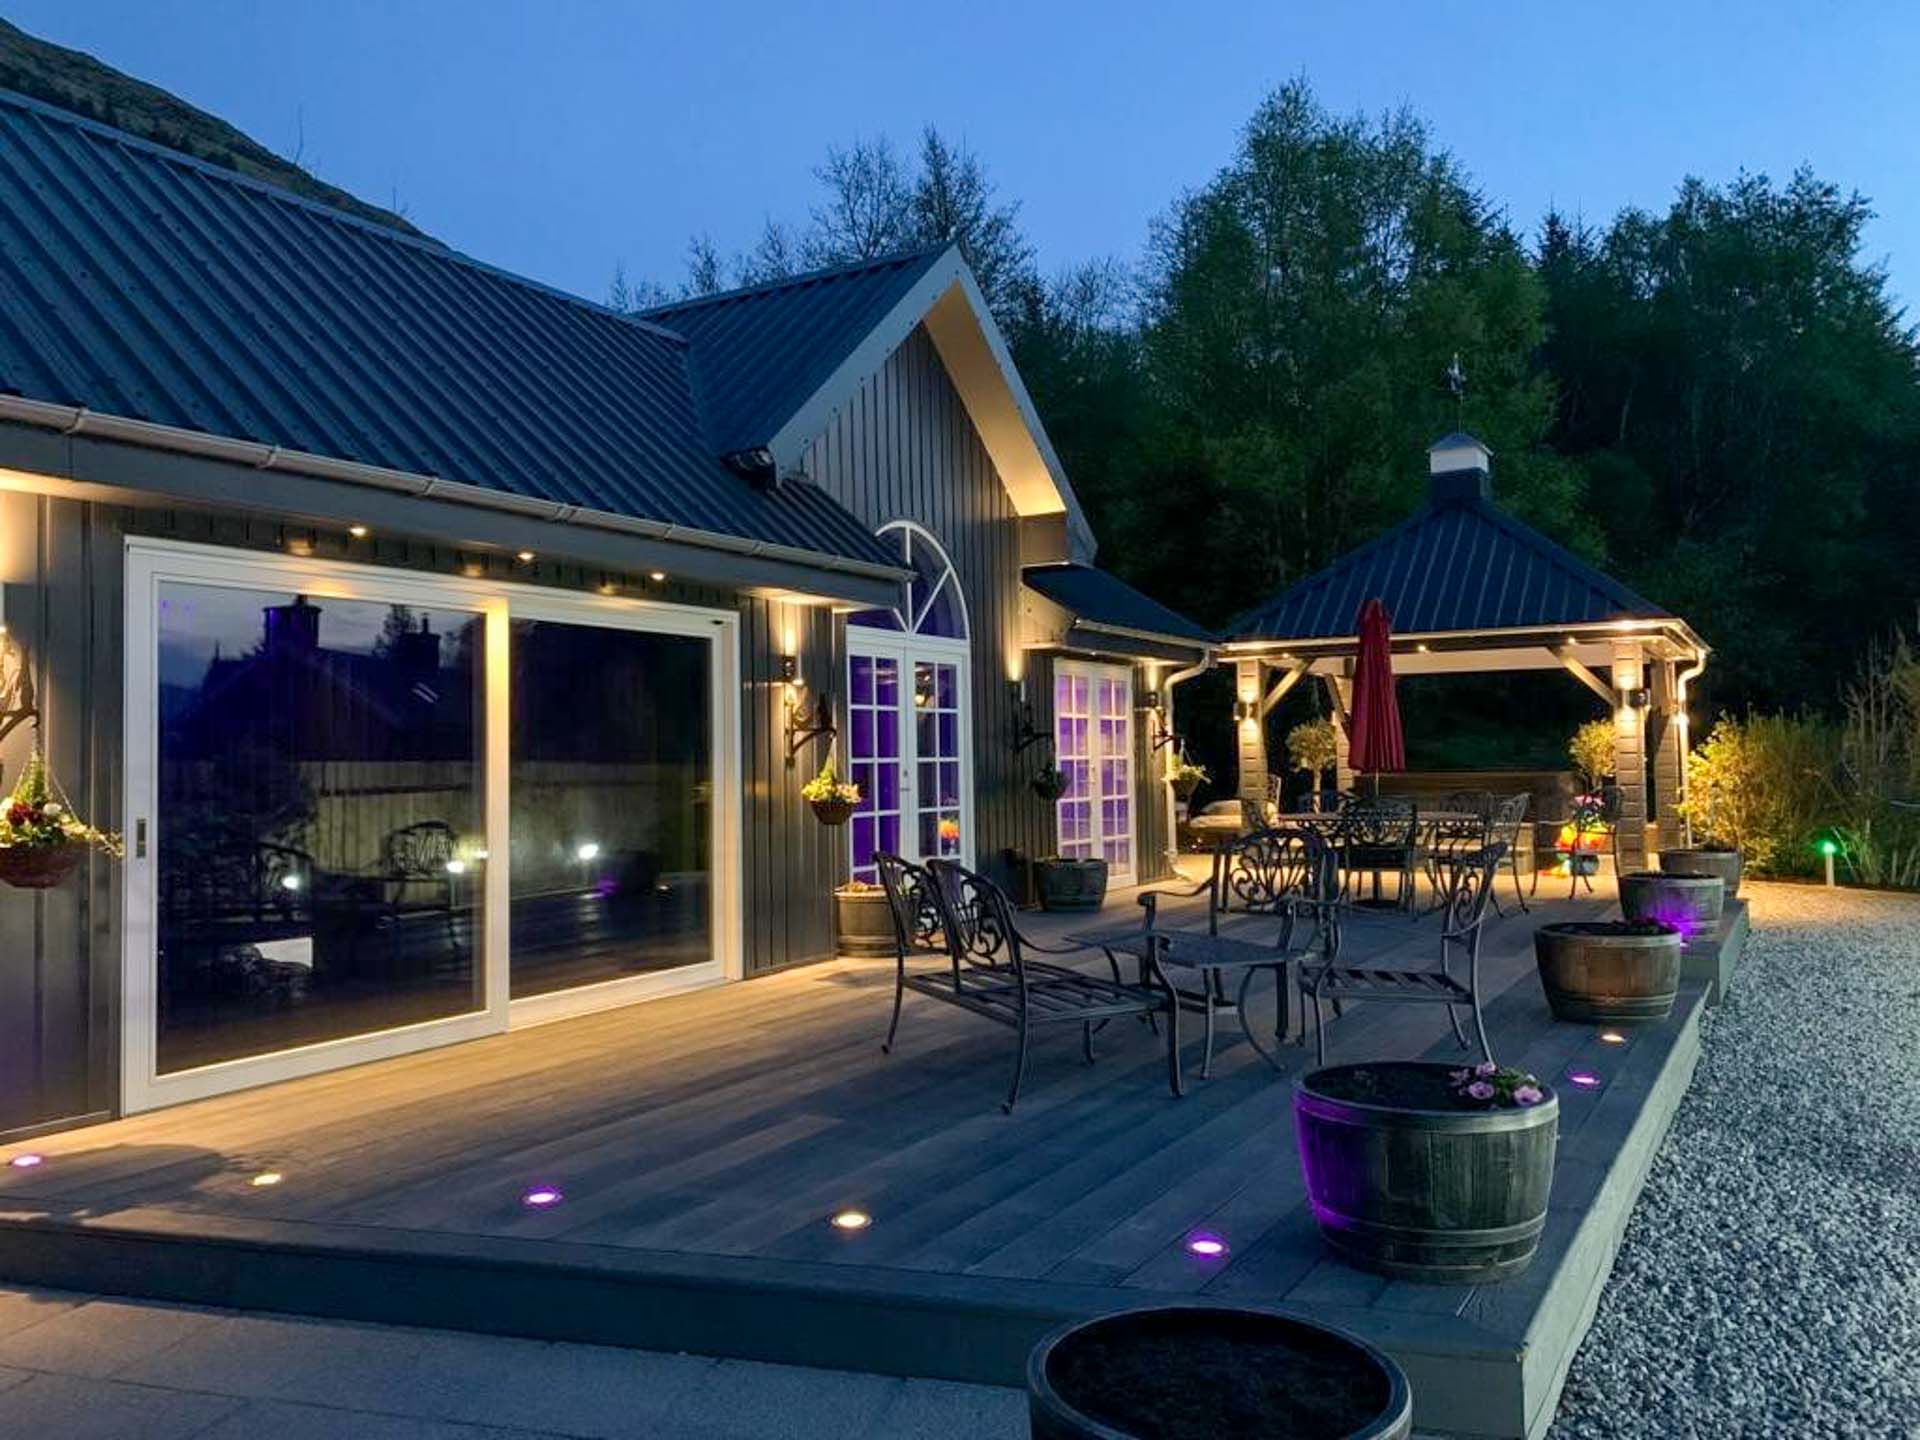 Little Fox Lodge Luxury Hideaway with its gorgeous decking, outdoor fireplace, sundeck and private hot tub.